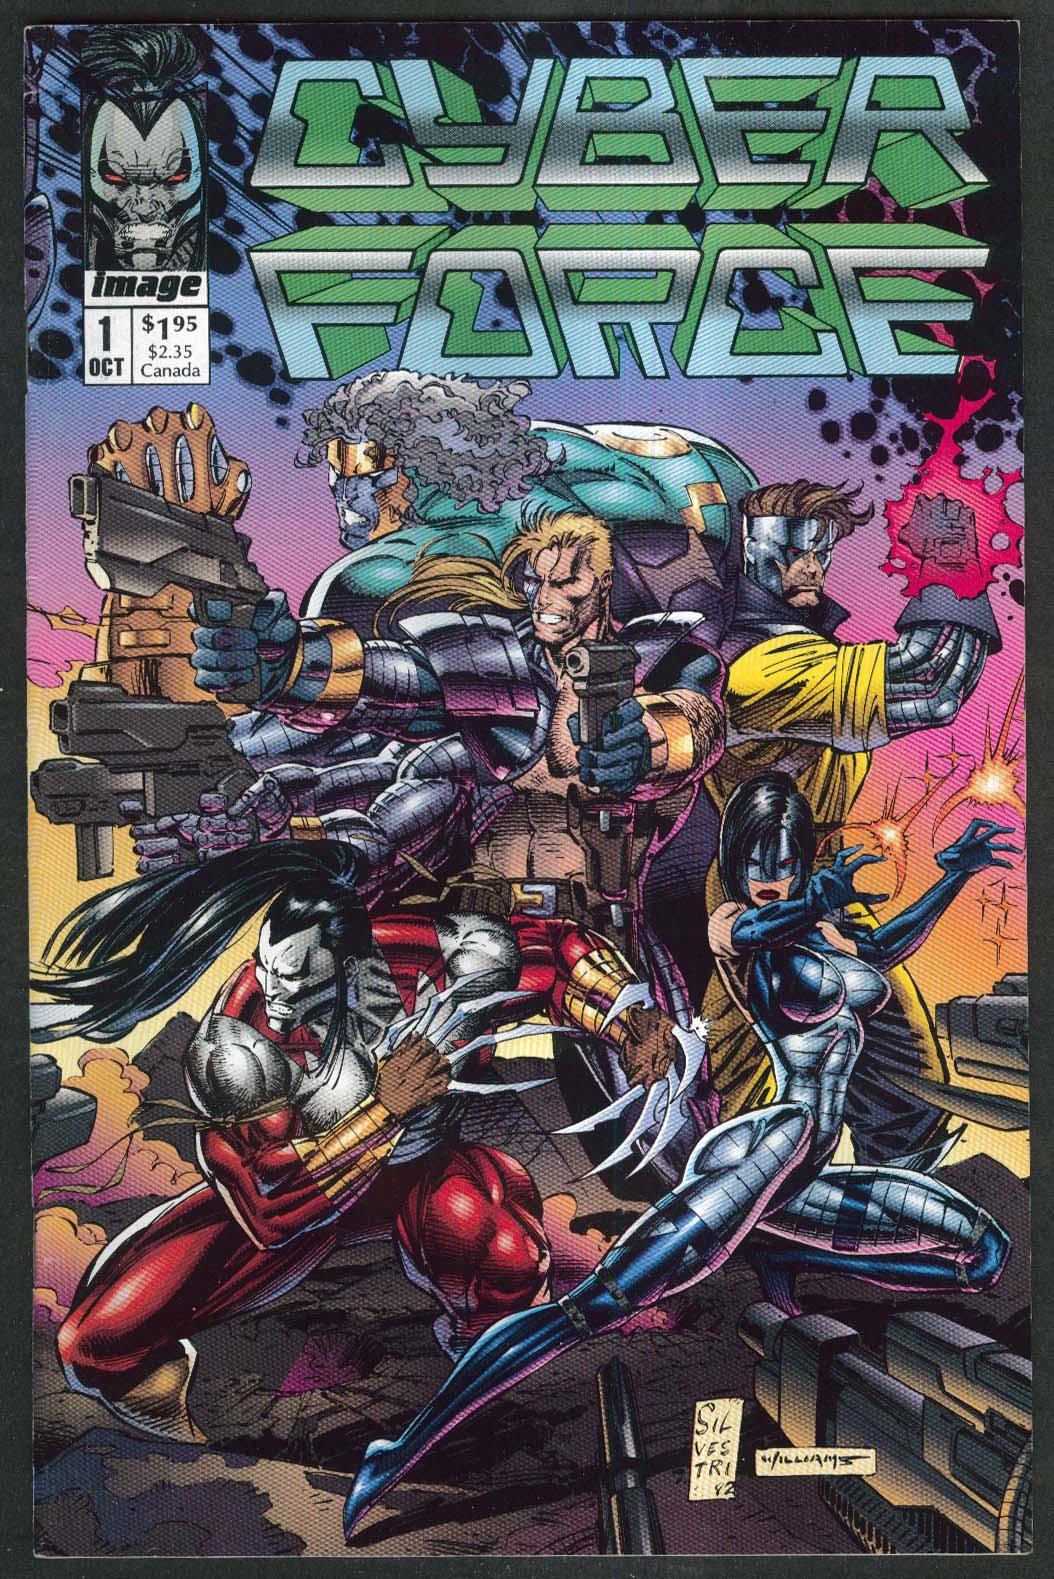 CYBER FORCE #1 Image comic book 10 1992 1st printing